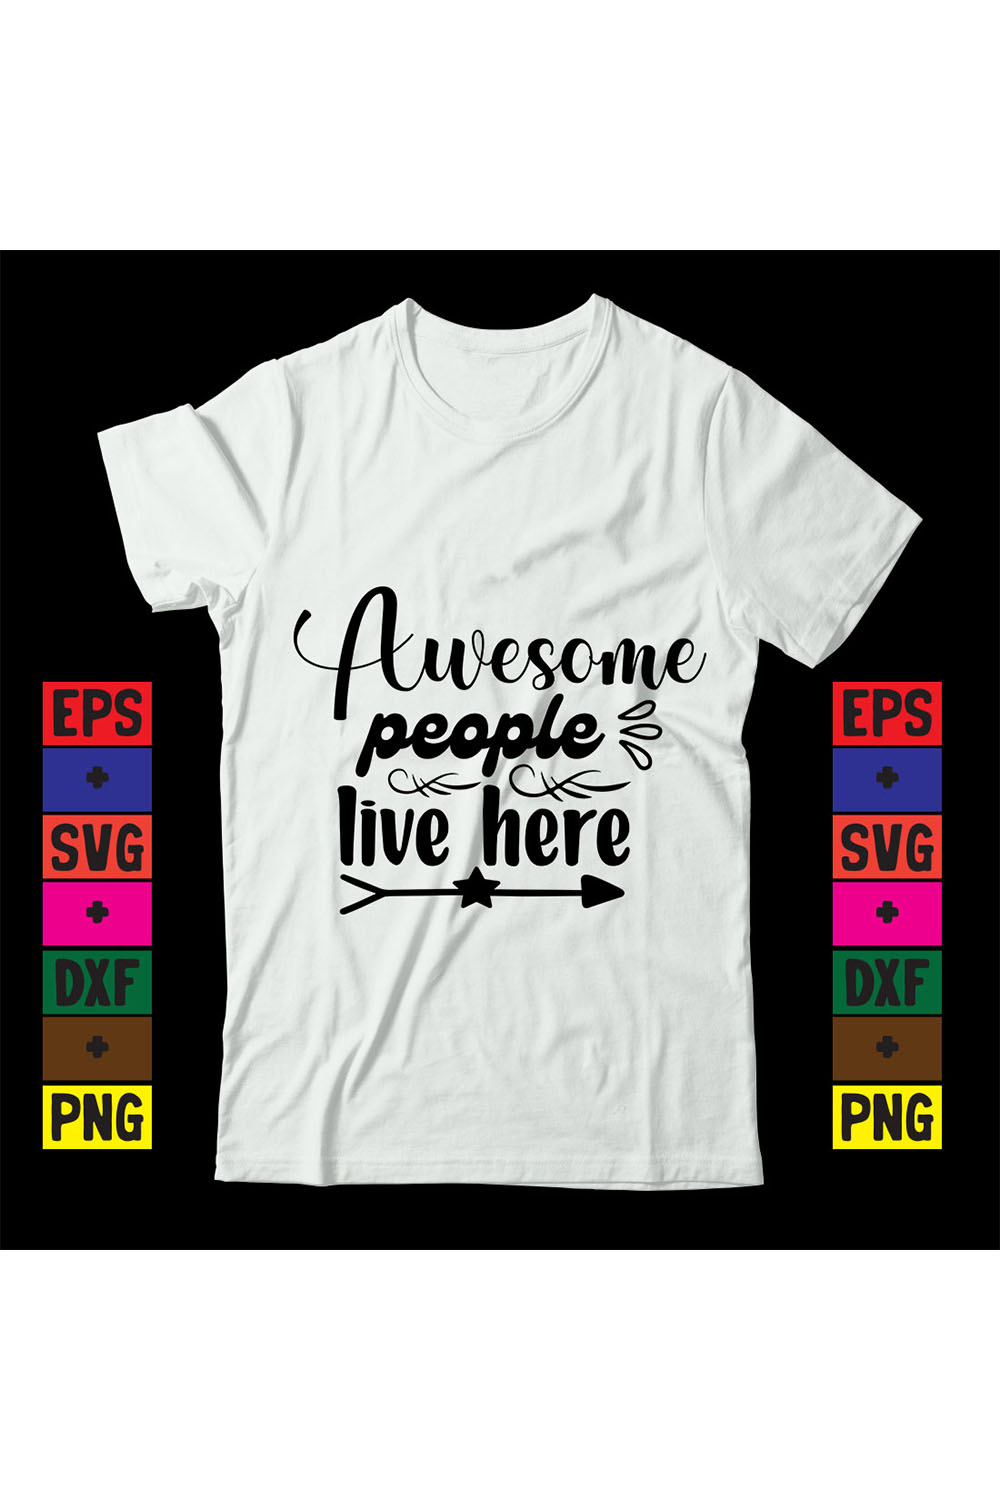 Awesome people live here pinterest preview image.